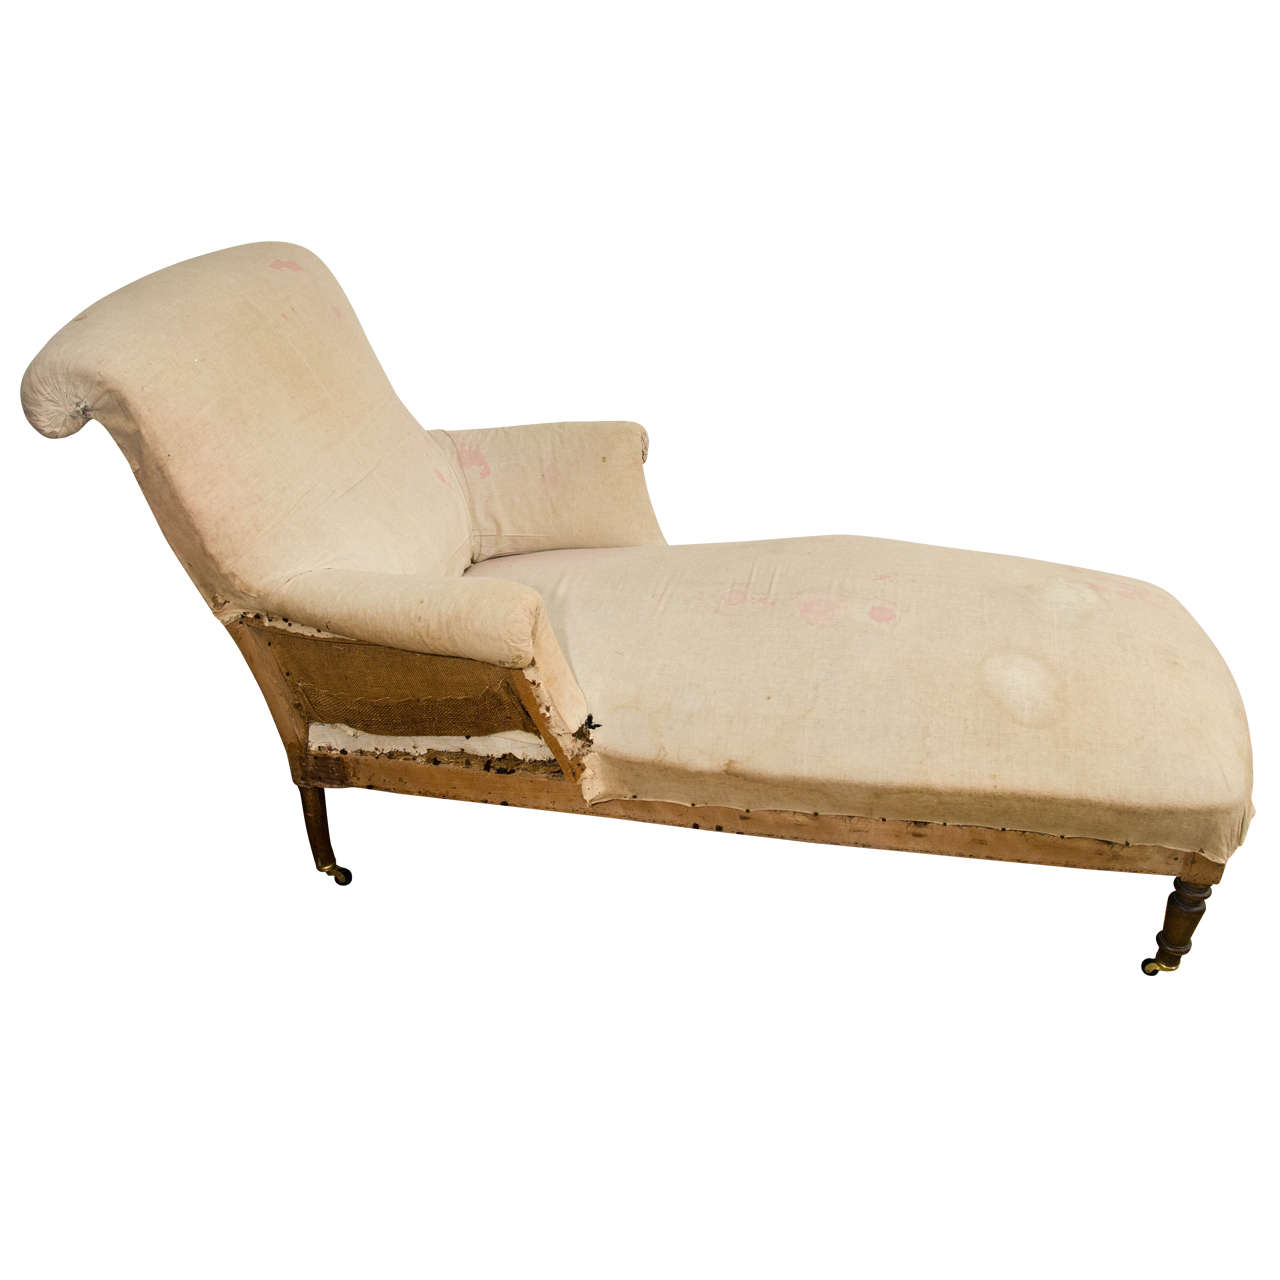 French 1930s Chaise Longue At 1stdibs